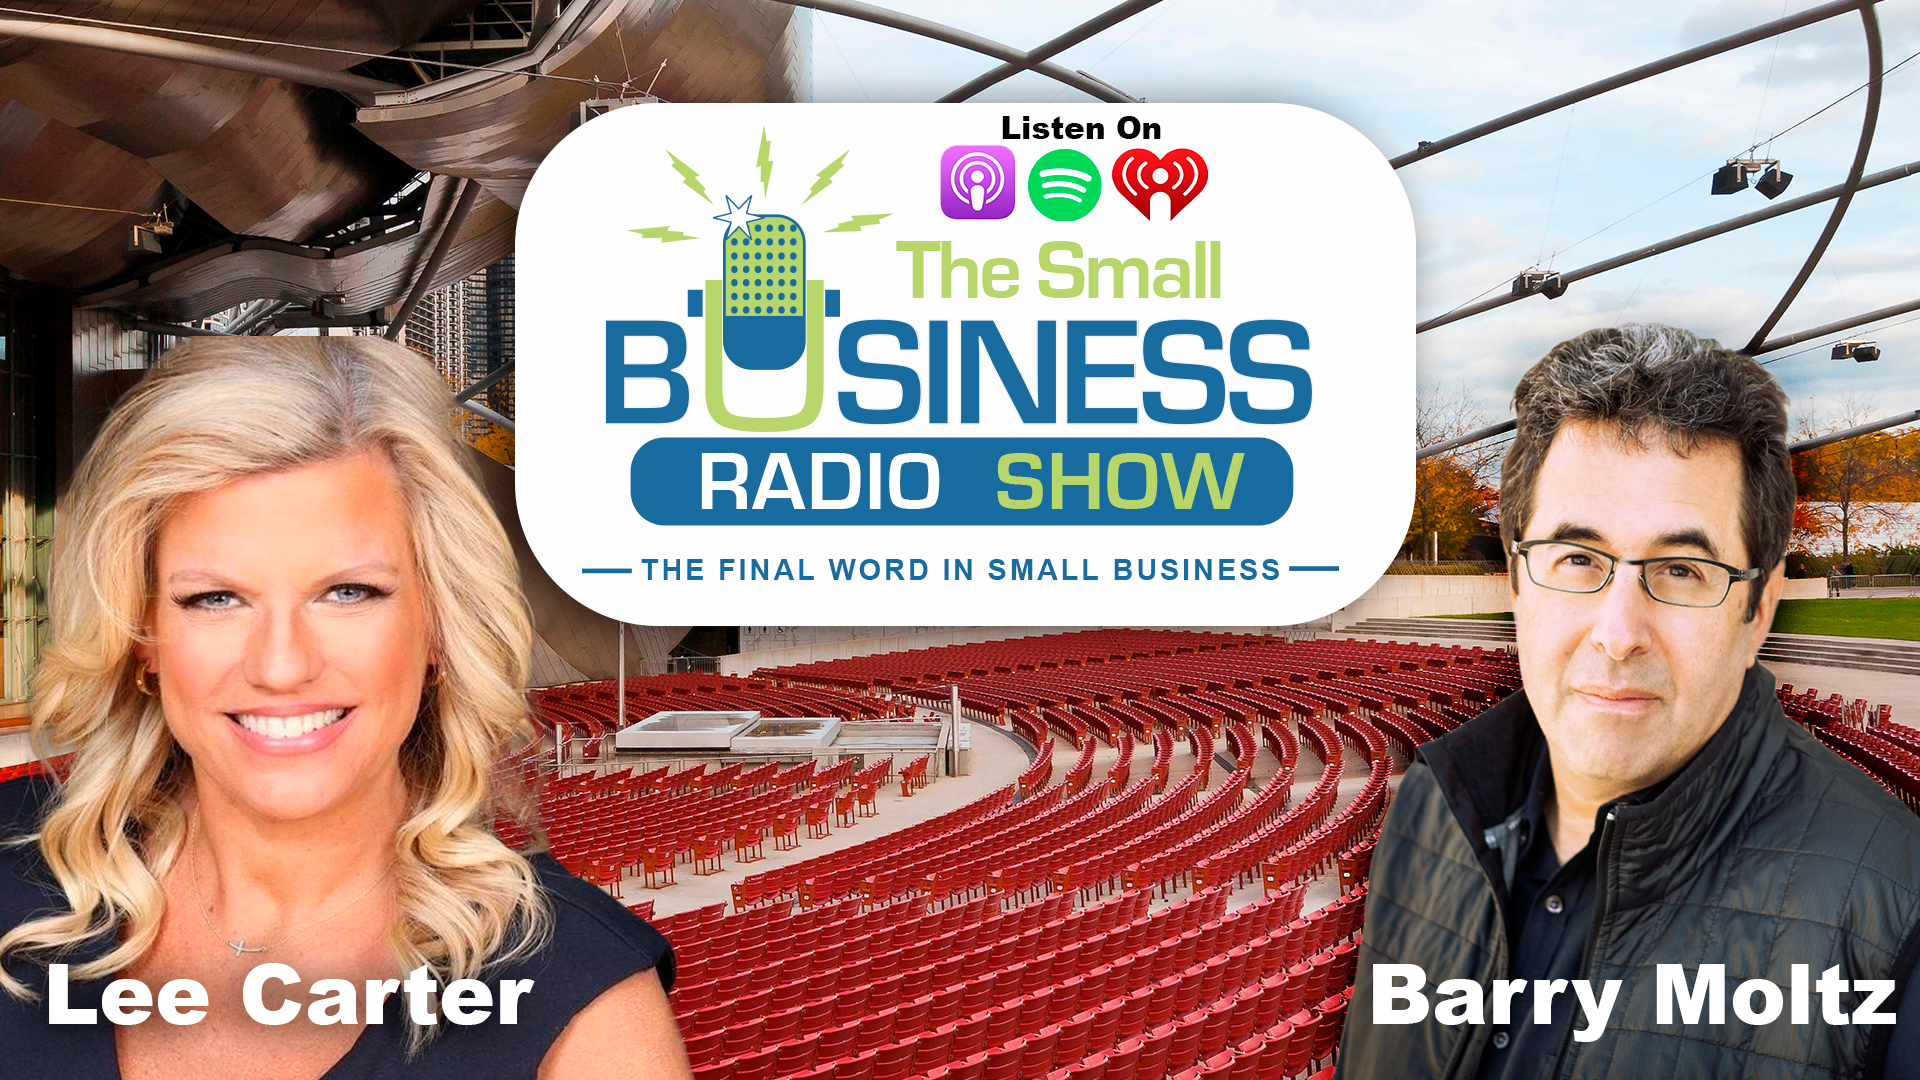 Lee Carter on The Small Business Radio Show